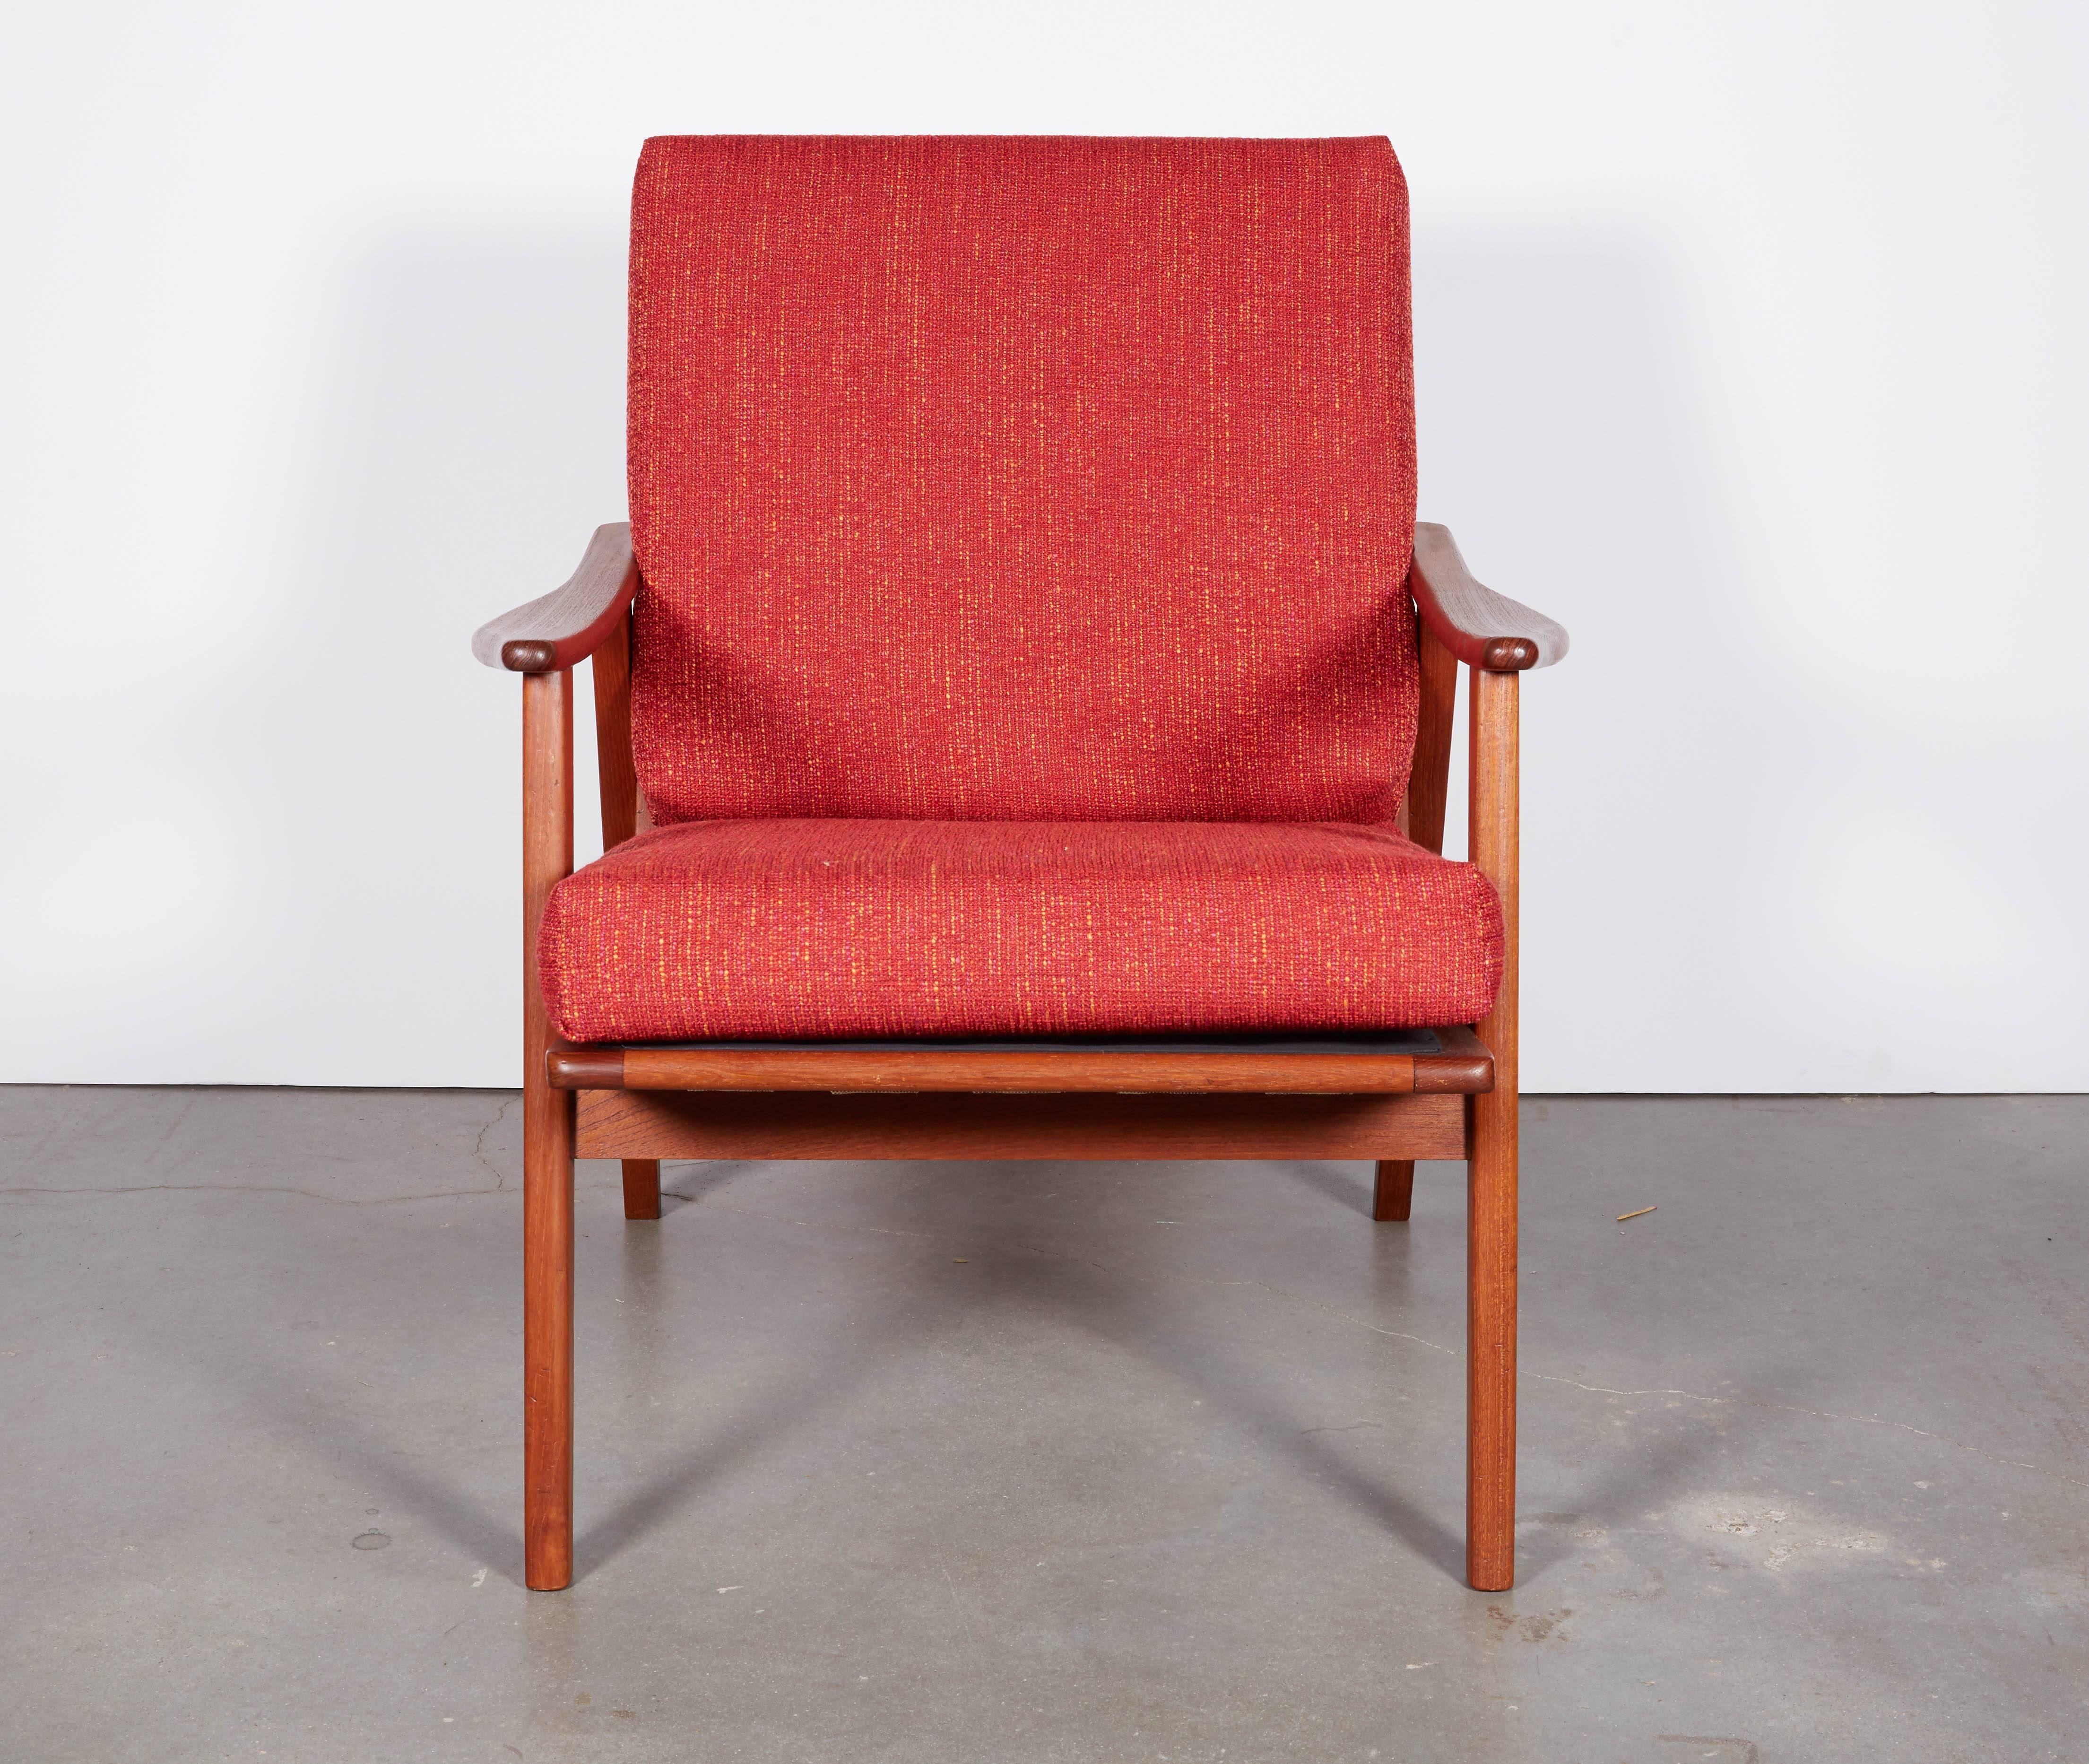 Vintage 1950s Danish Modern Arm Chair

This wood framed chair is in excellent condition and newly upholstered. Ready for pick up delivery or shipping anywhere in the world.